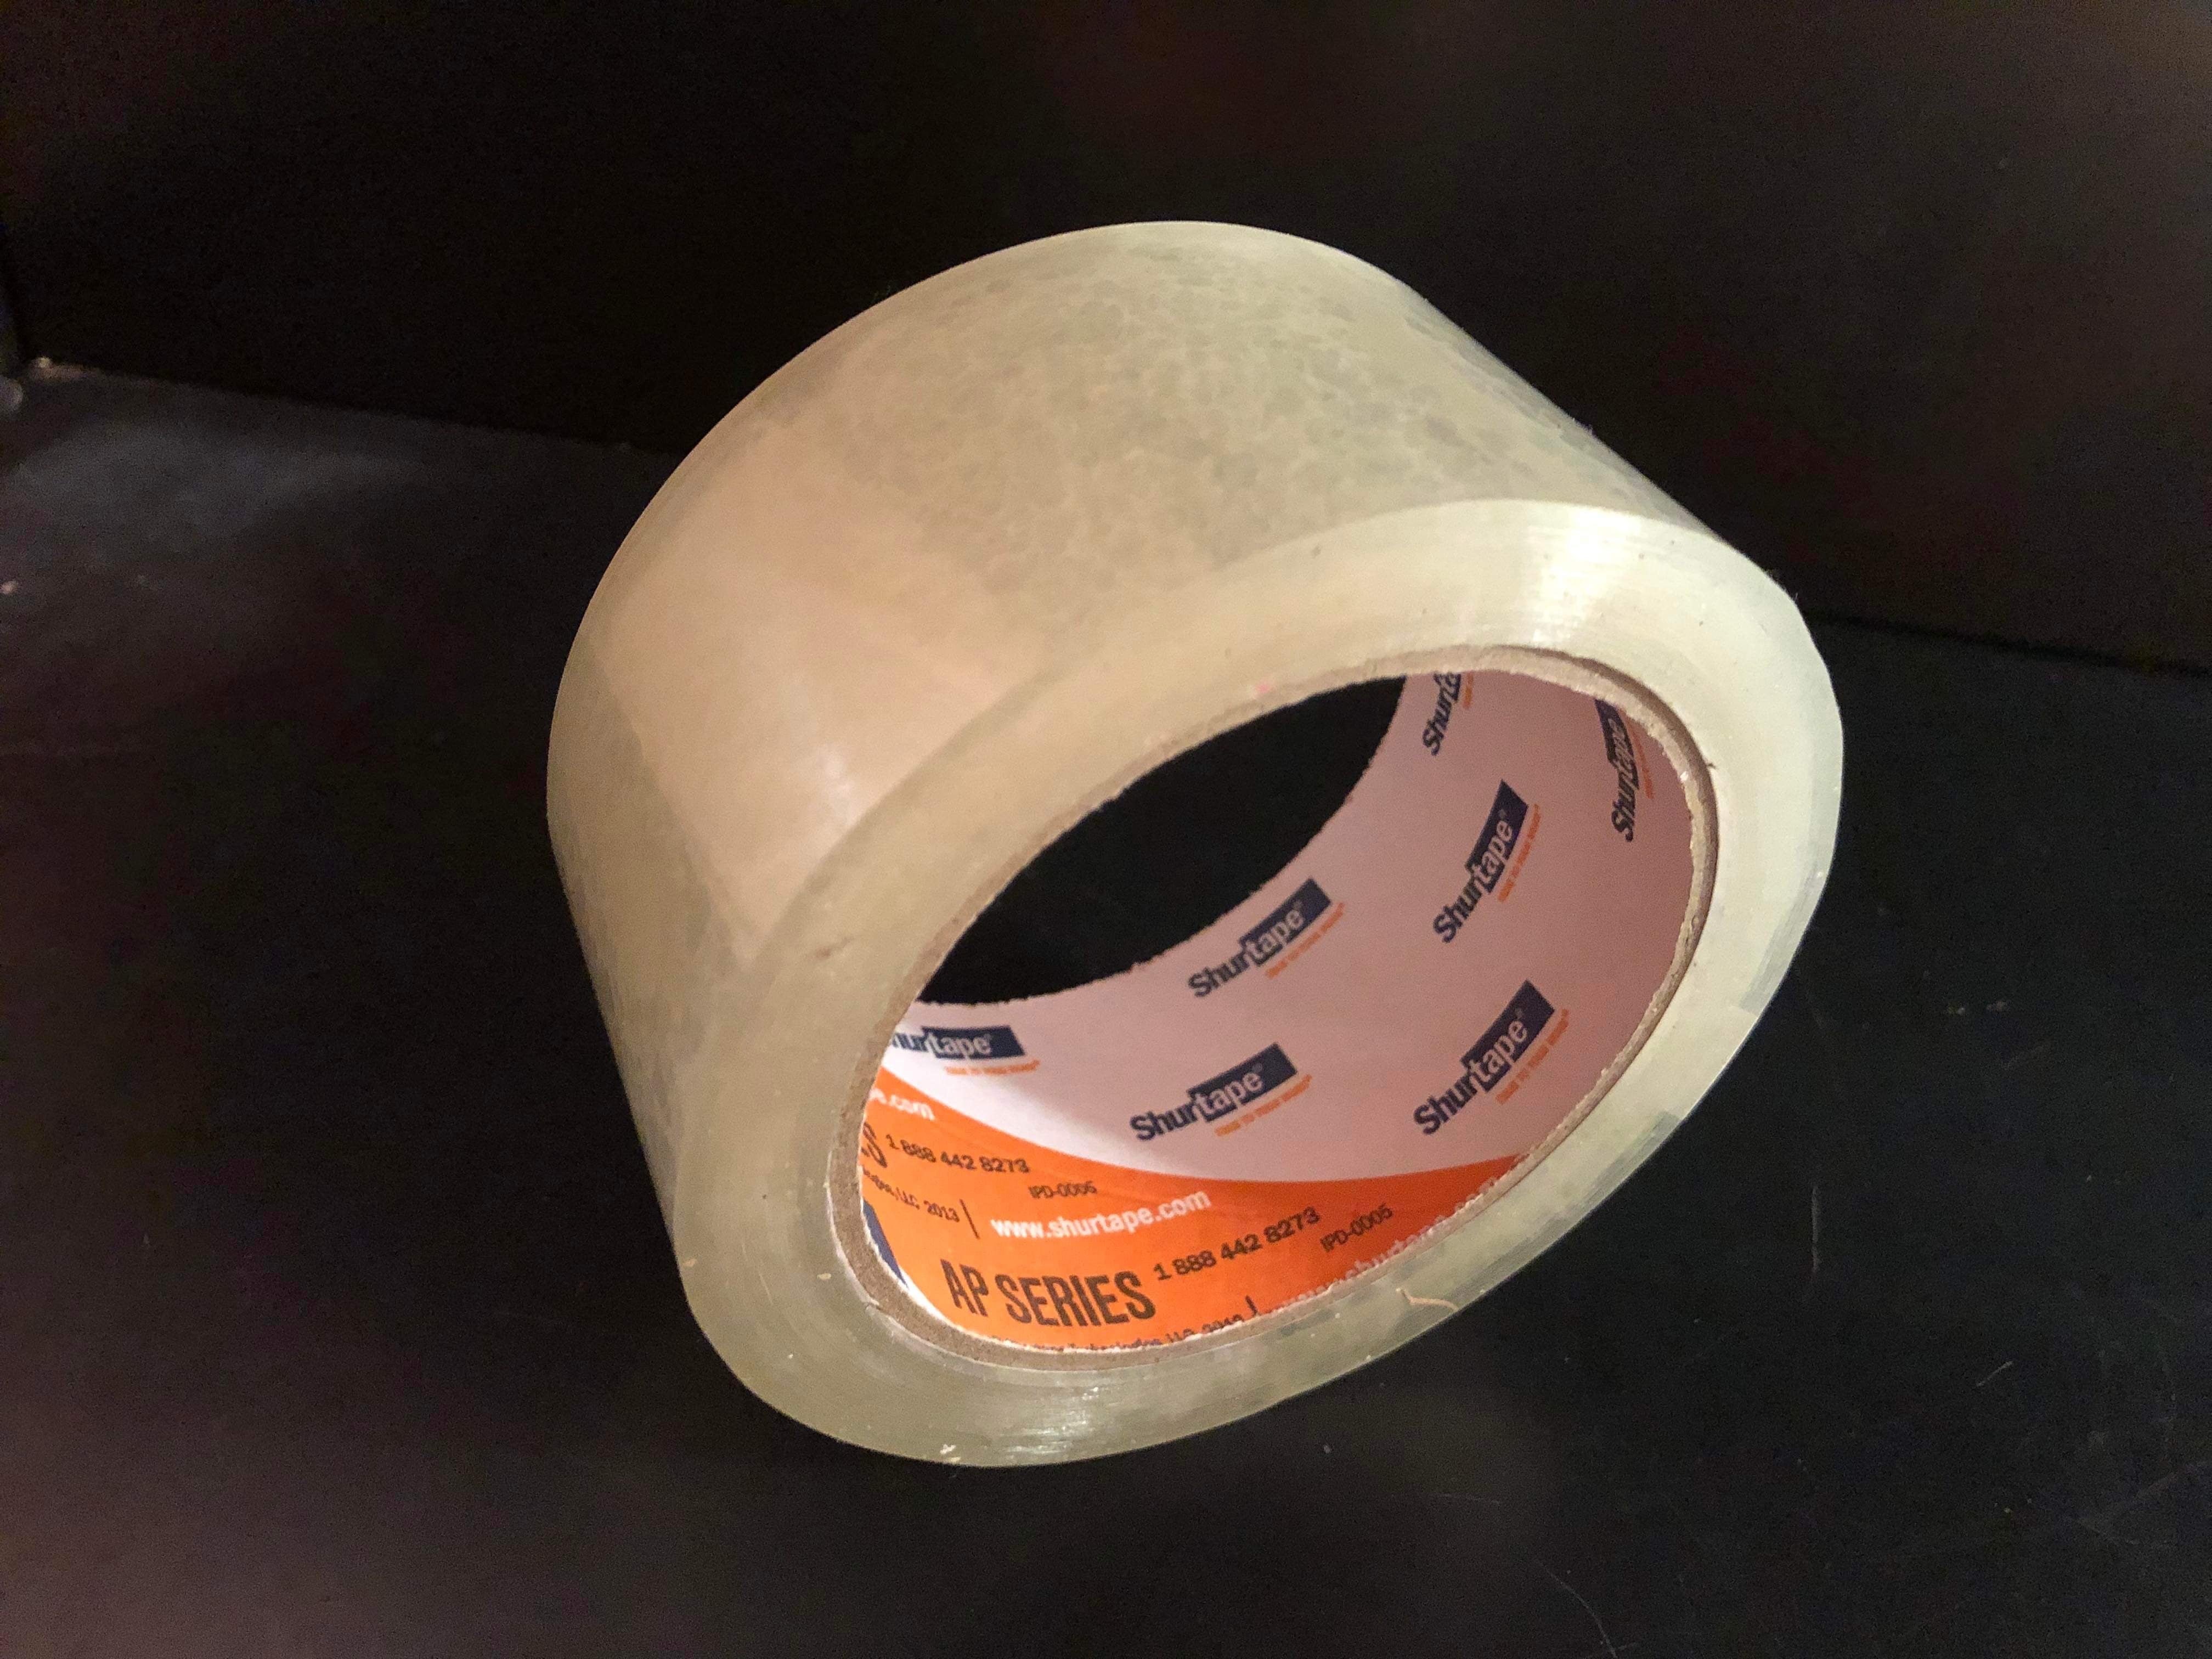 Intertape - Packing Tape: 2″ Wide, Clear, Acrylic Adhesive